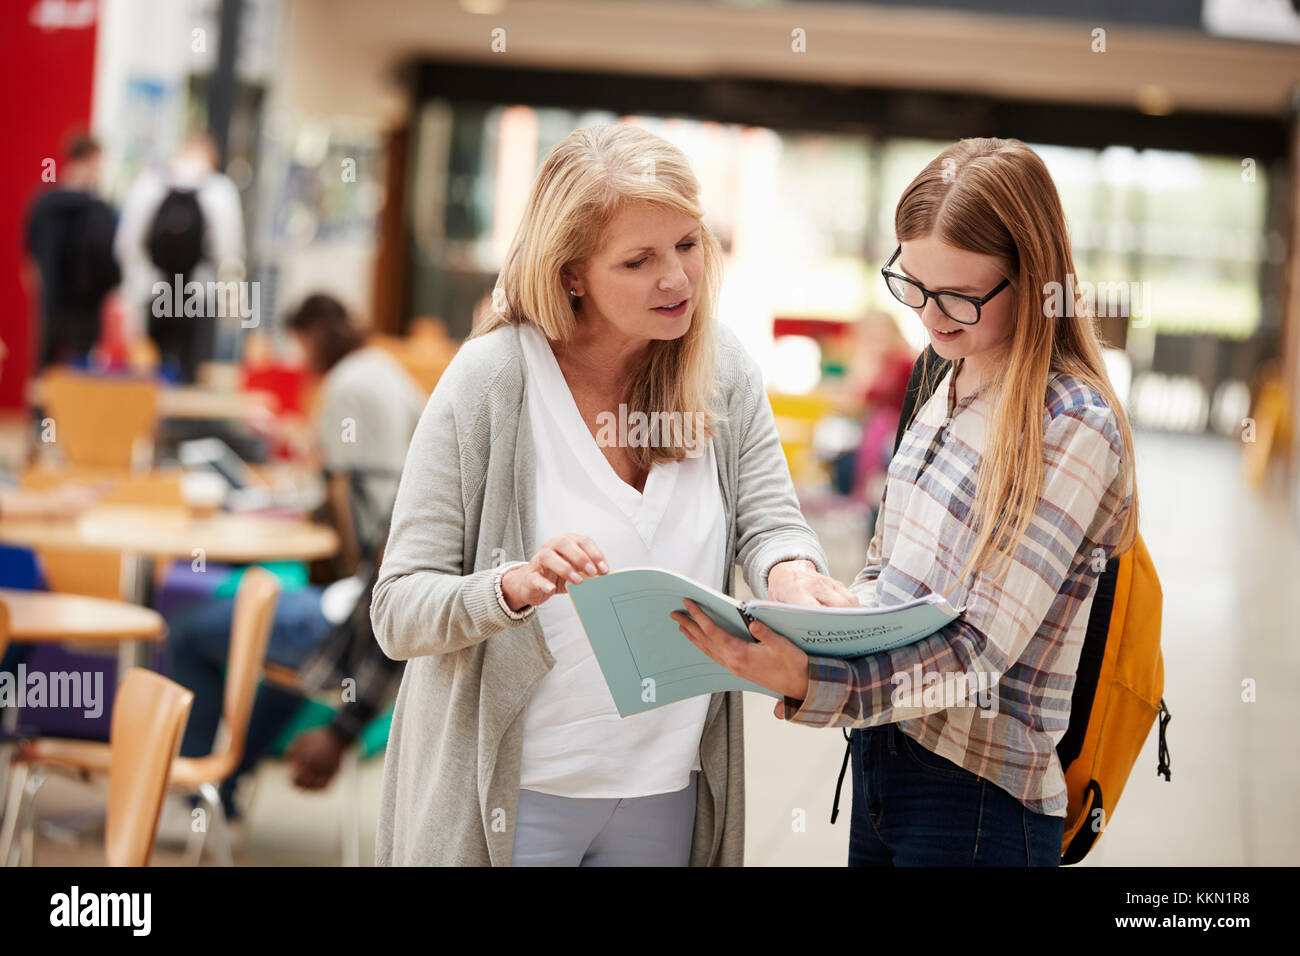 Teacher Talks To Student In Communal Area Of College Campus Stock Photo